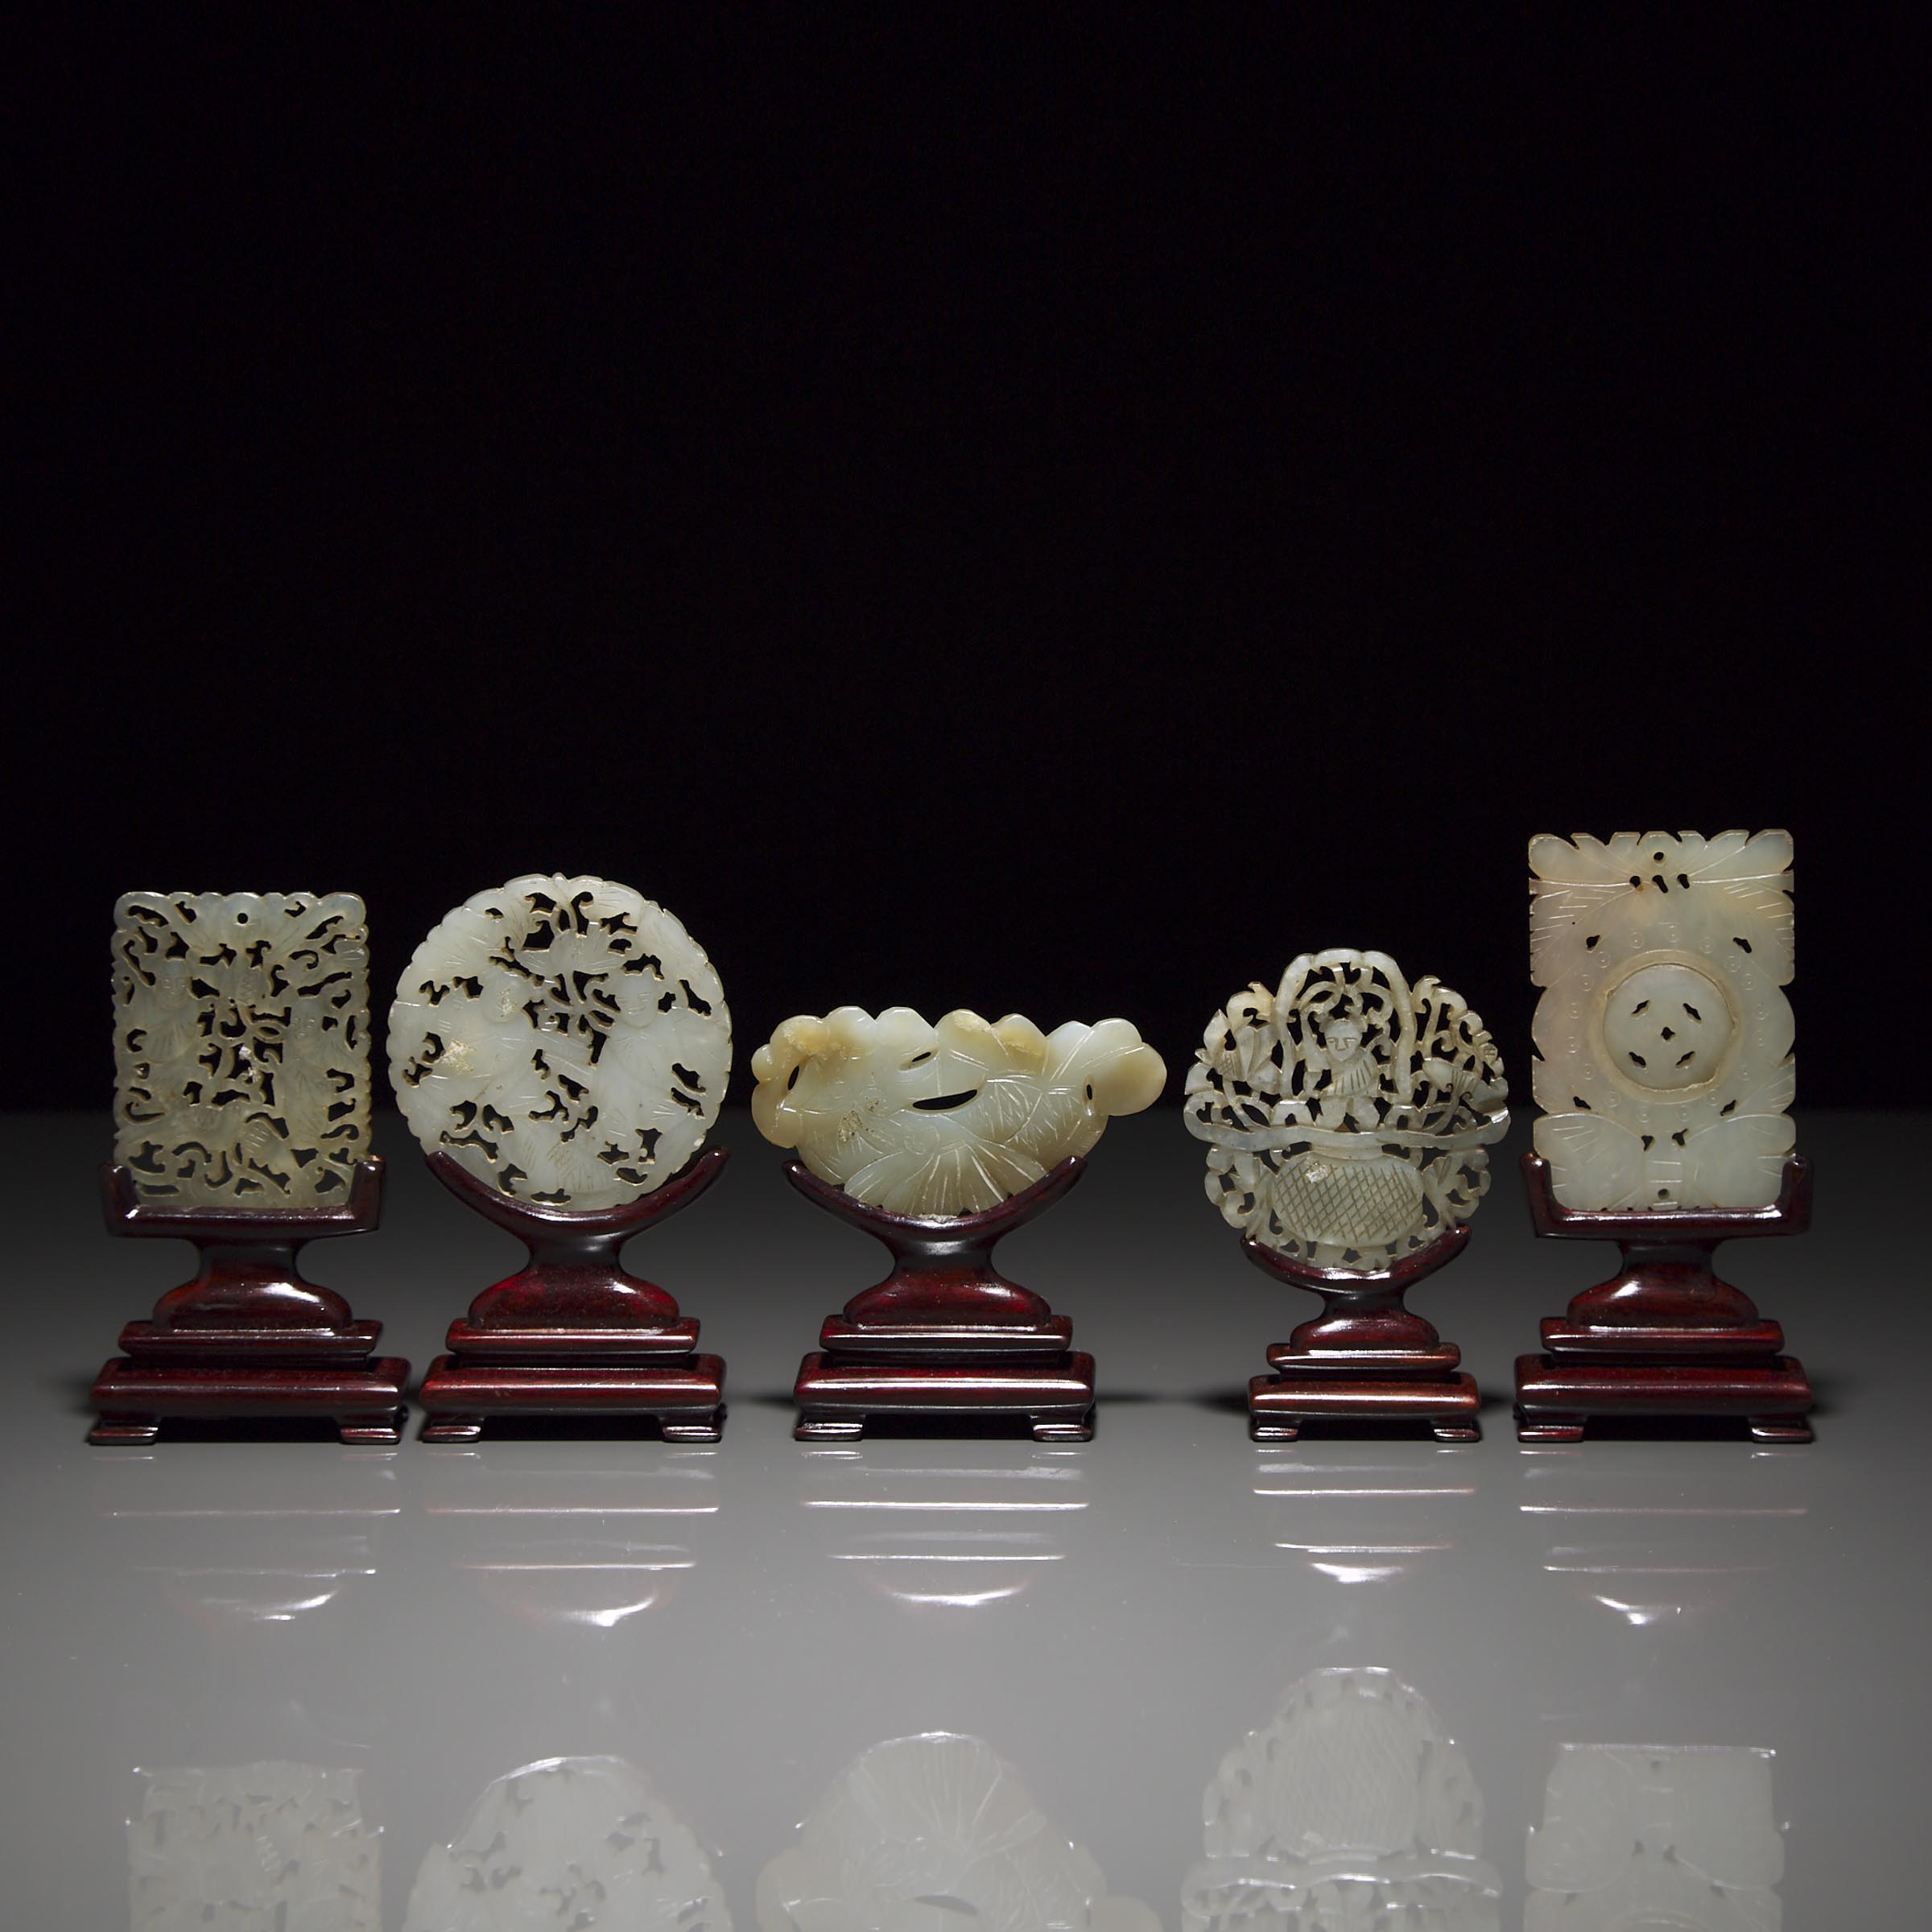 A Group of Five Carved Jade Plaques on Stands, Ming Dynasty and Later